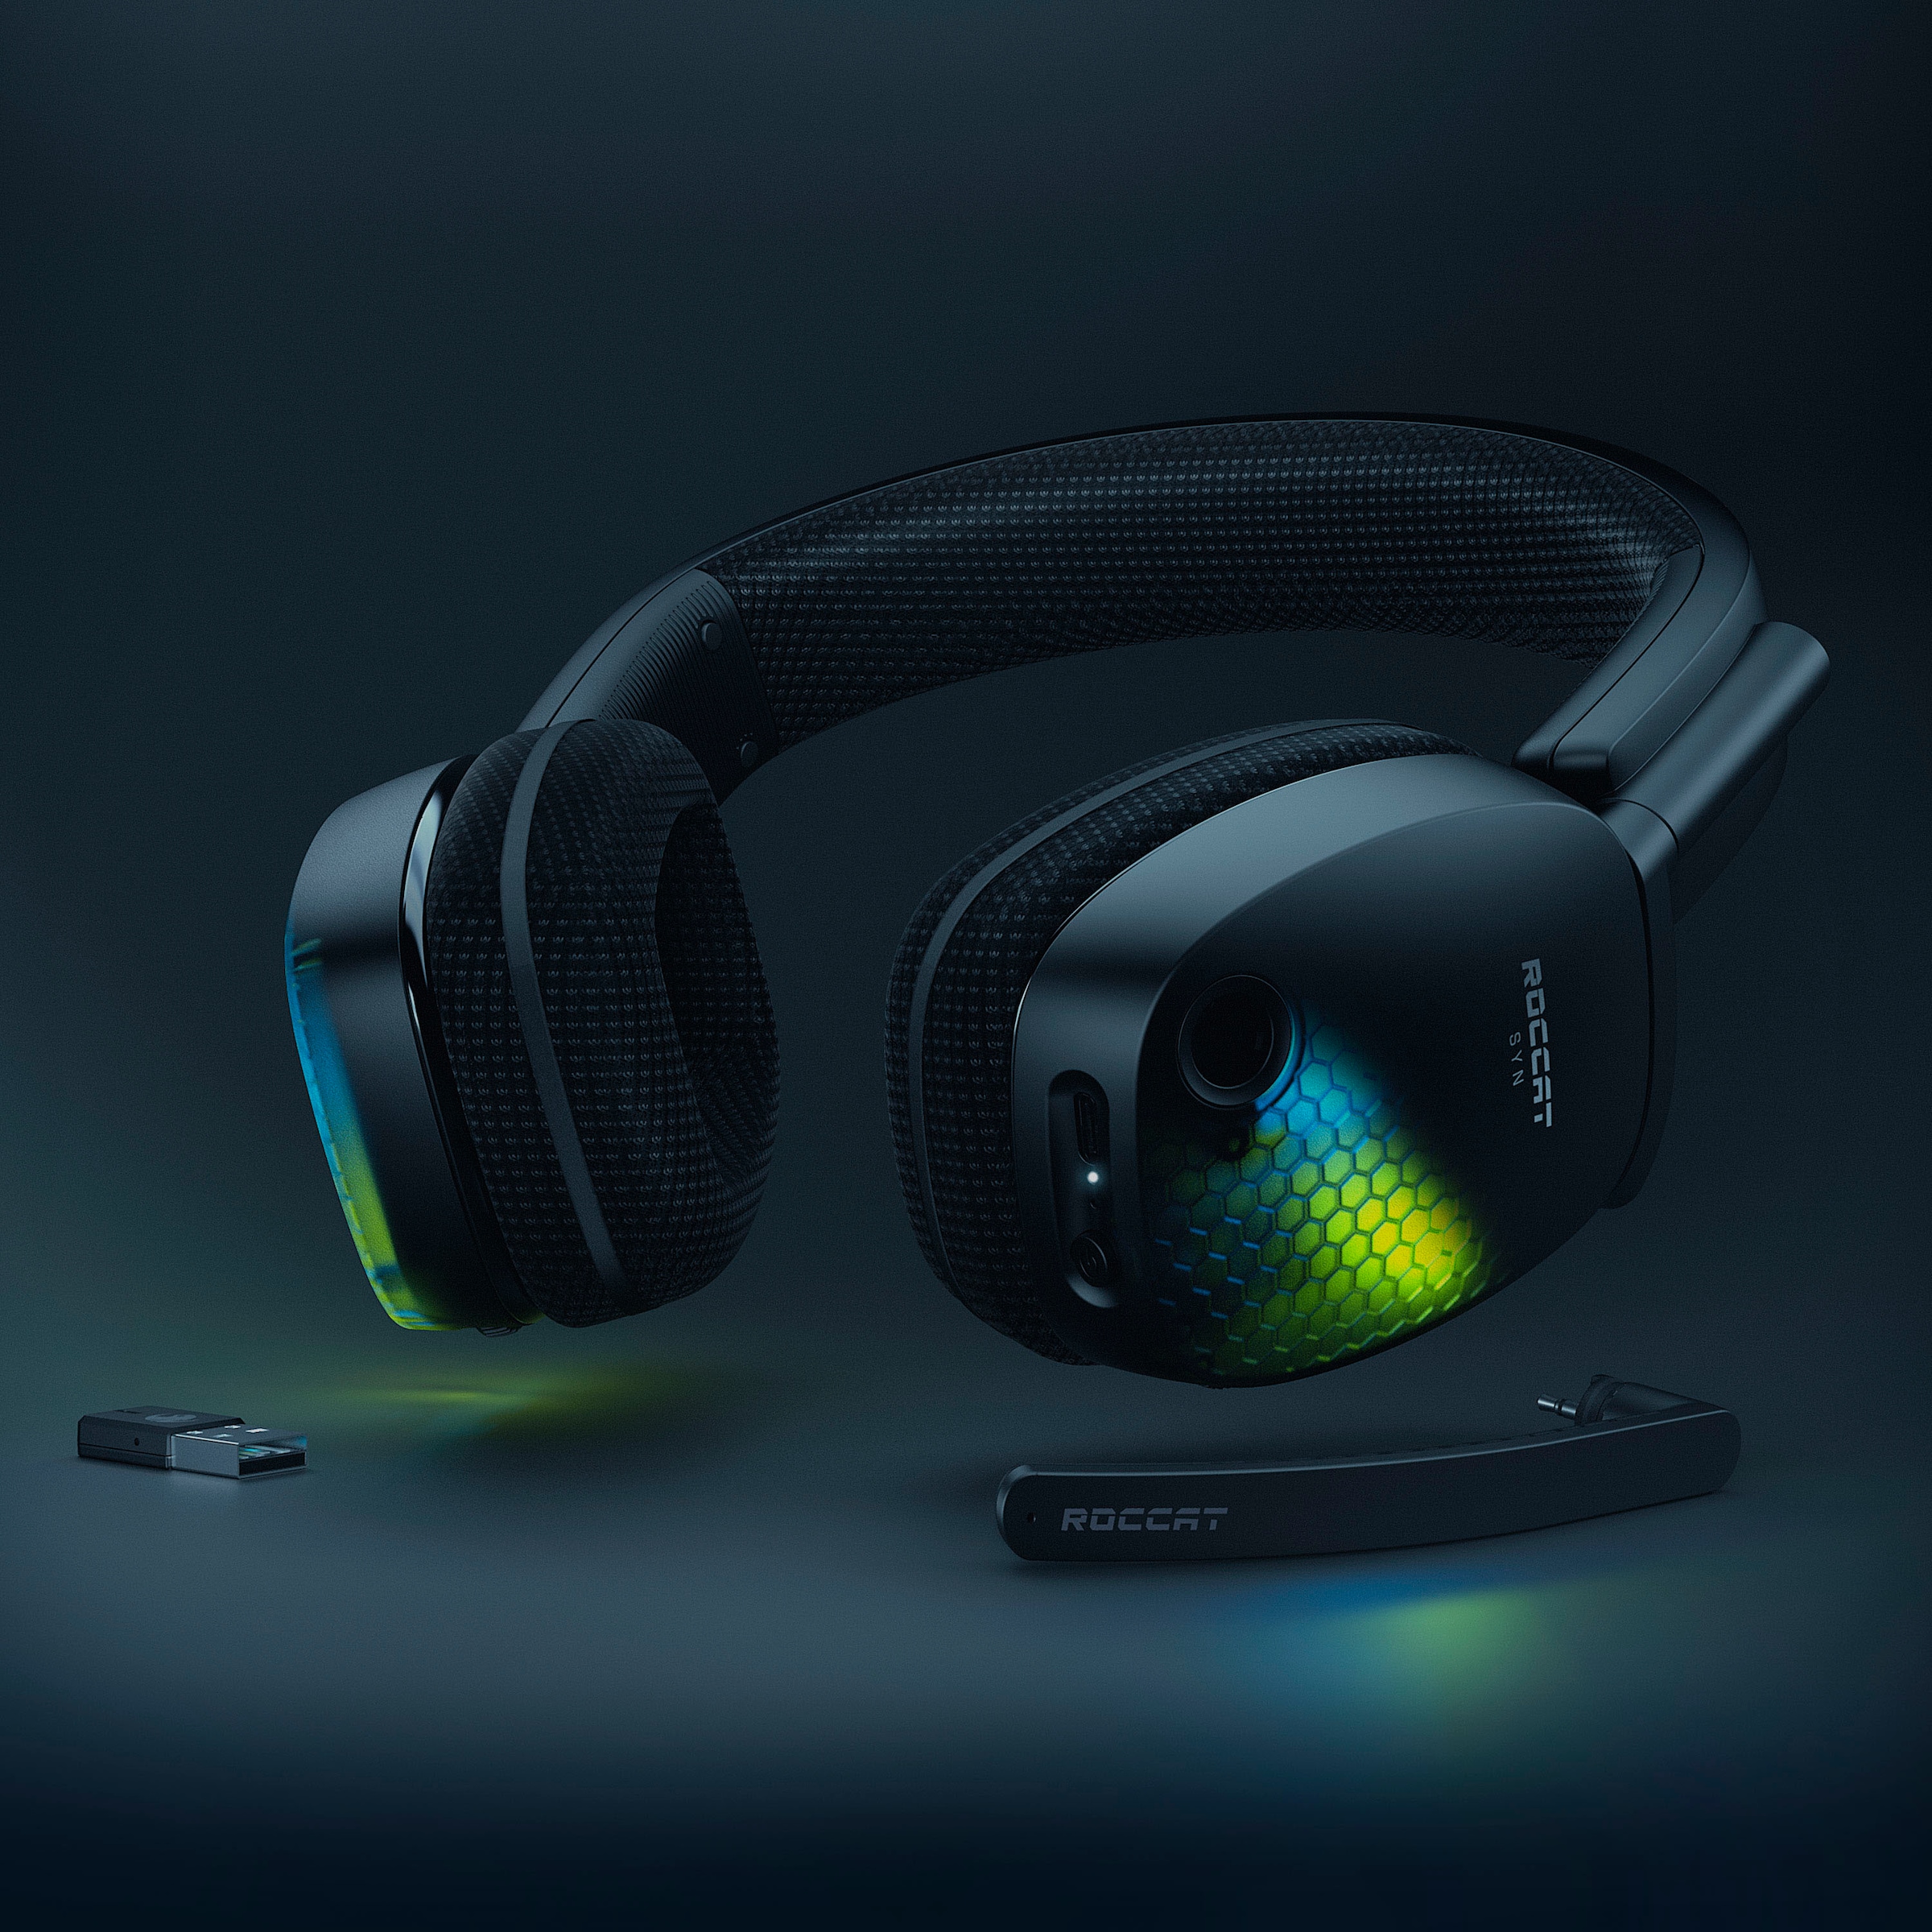 Gaming-Headset ROCCAT Noise-Cancelling online »SYN Air«, WLAN jetzt Pro OTTO (WiFi), bei